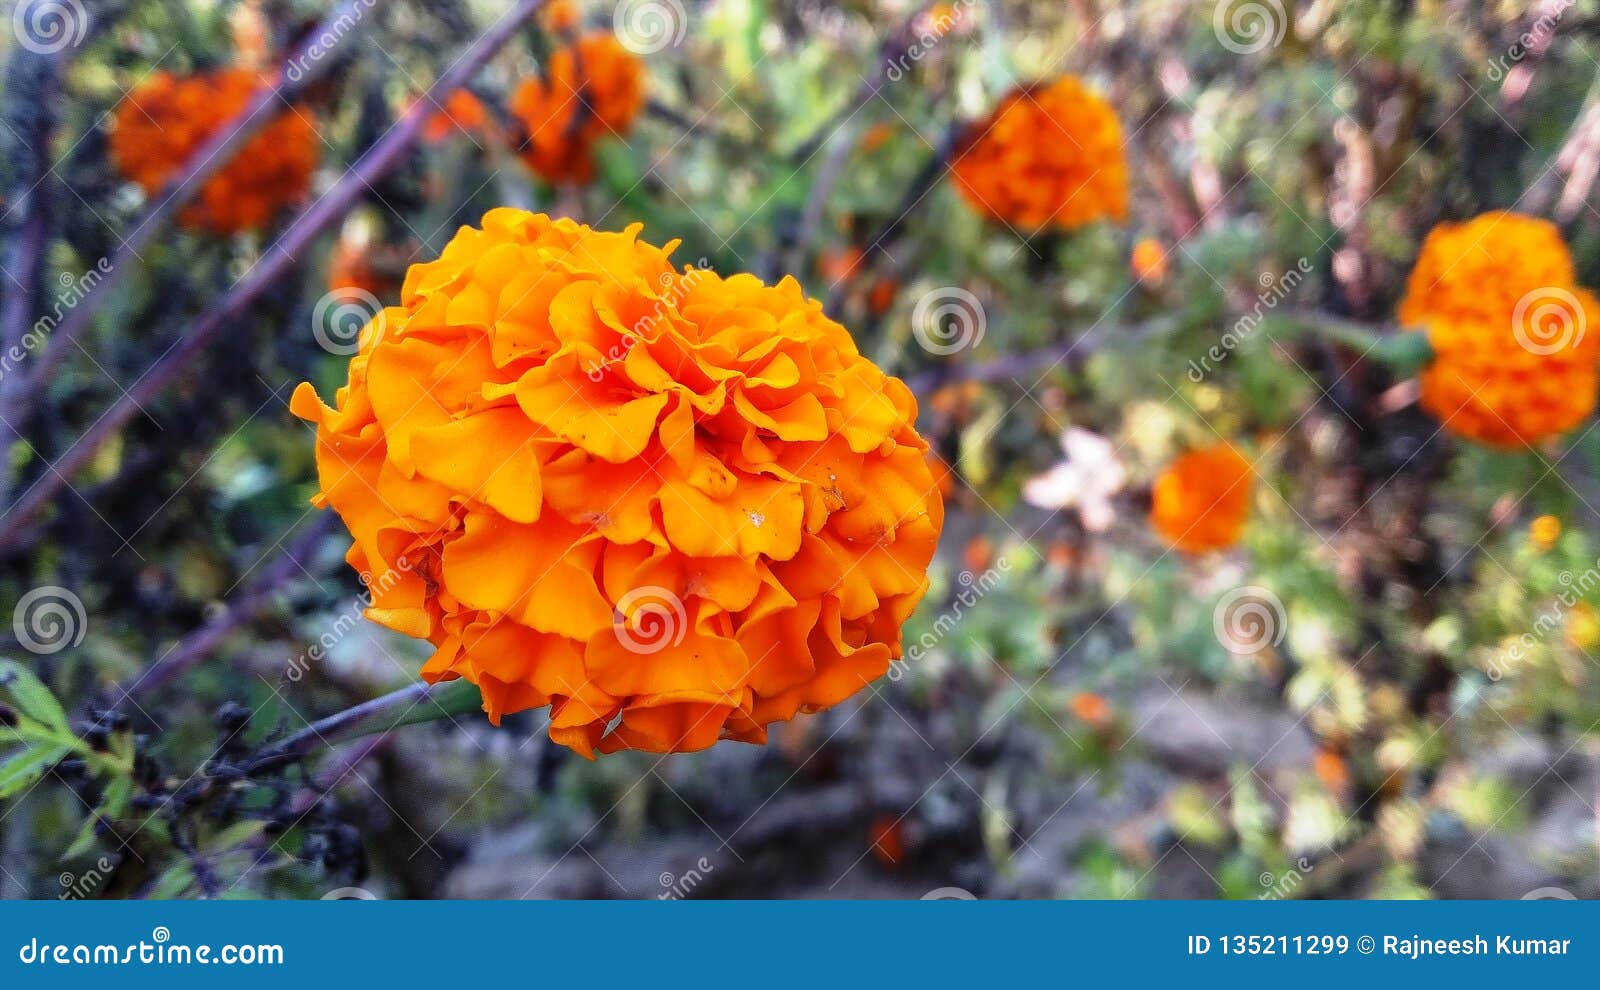 The Indian flower stock image. Image of field, botle - 135211299